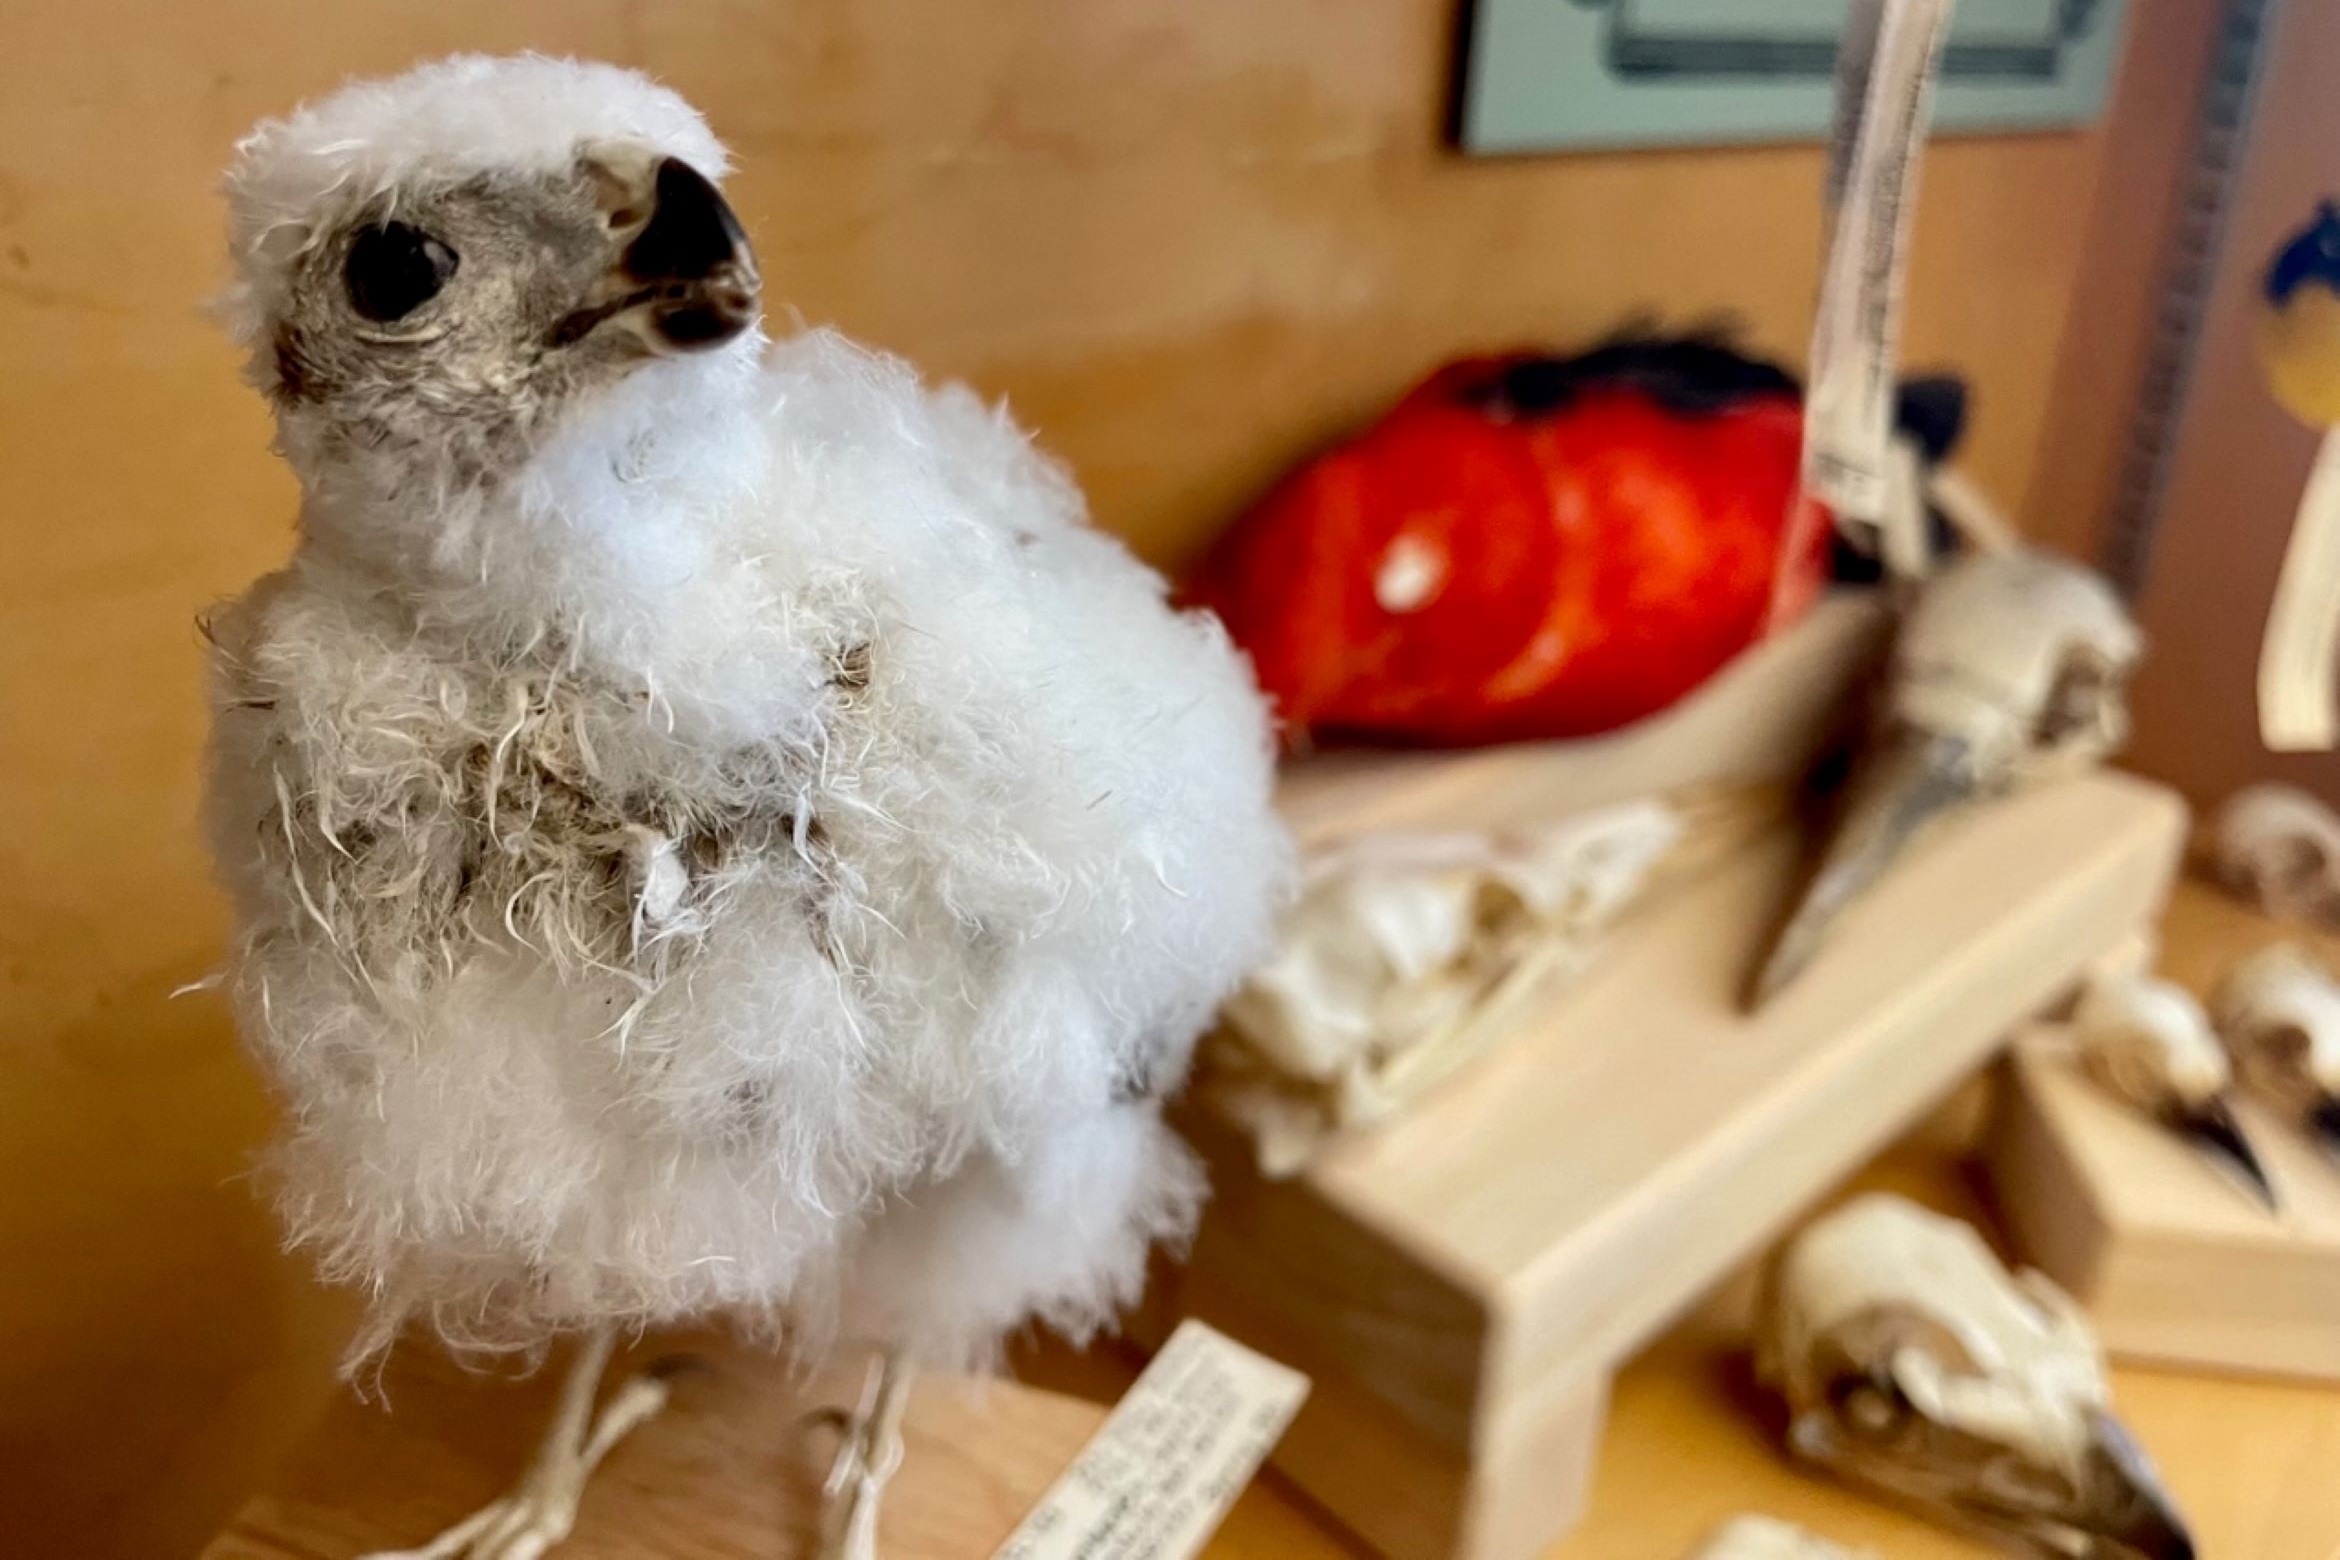 Taxidermy chick with more bird specimens in background